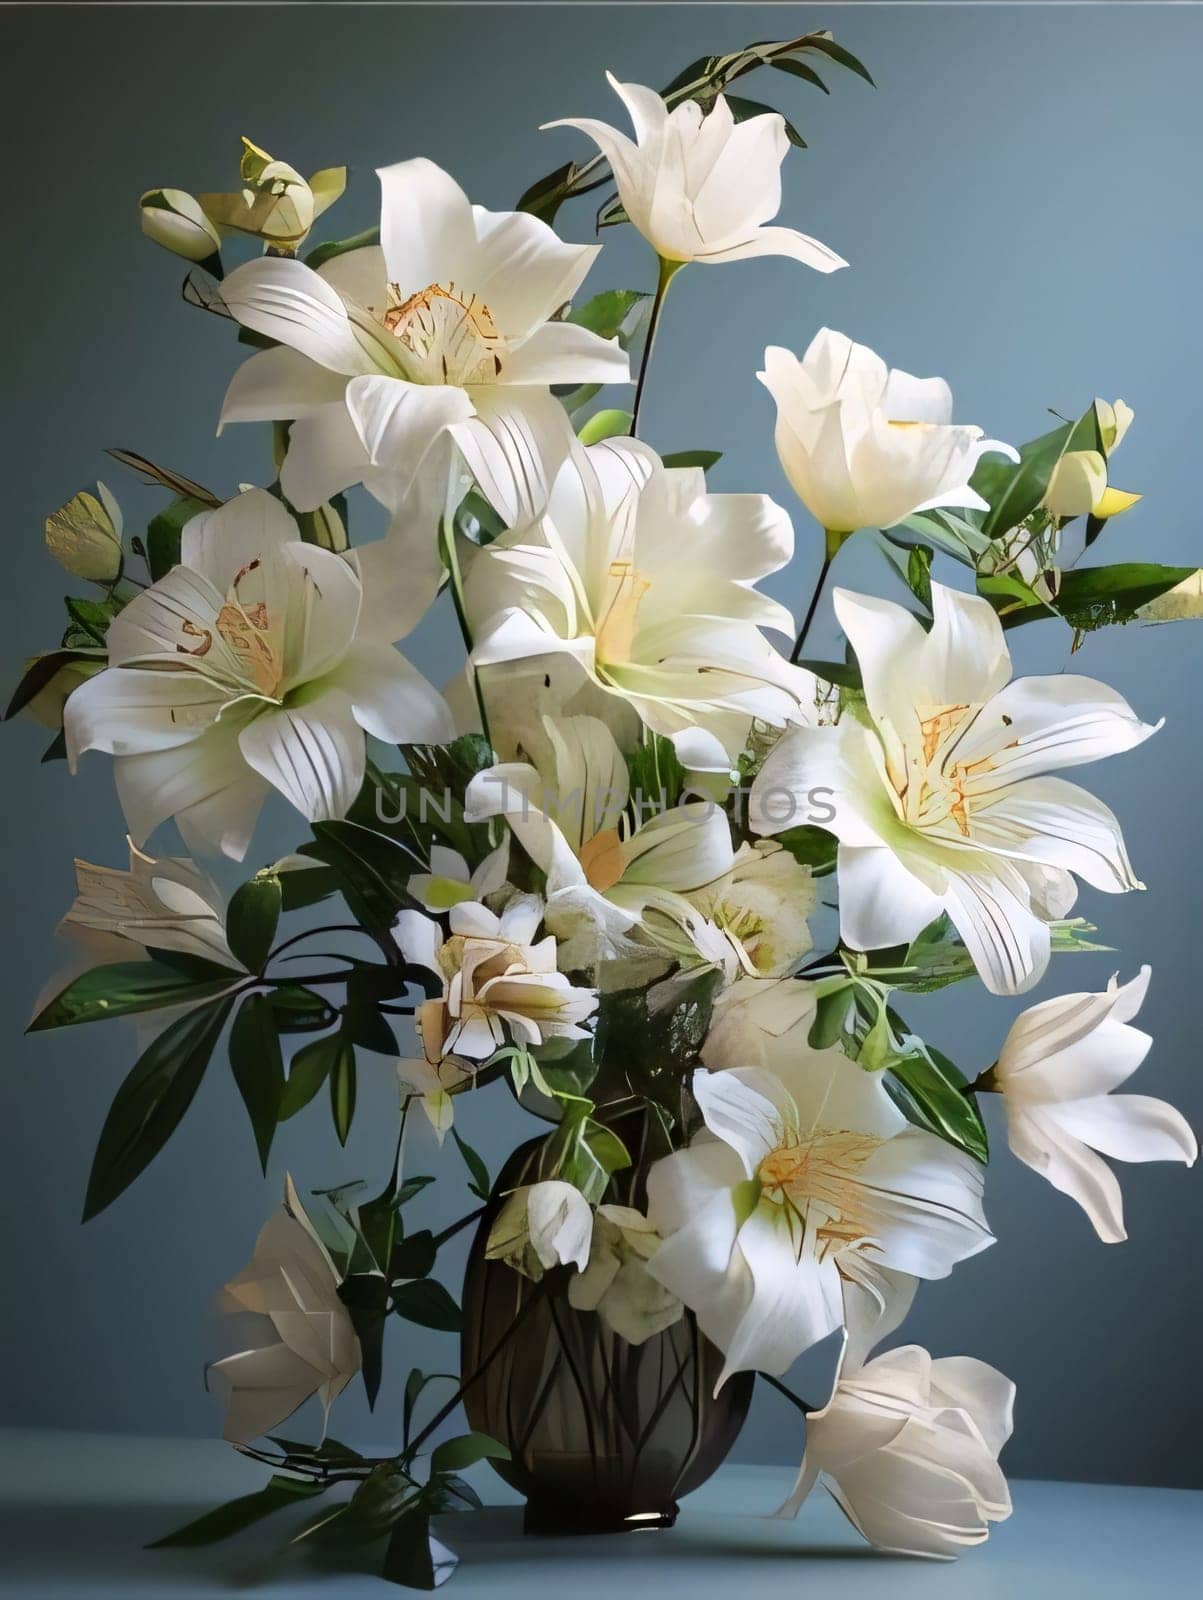 Bouquet of white lilies with green leaves in a vase gray background. Flowering flowers, a symbol of spring, new life. by ThemesS